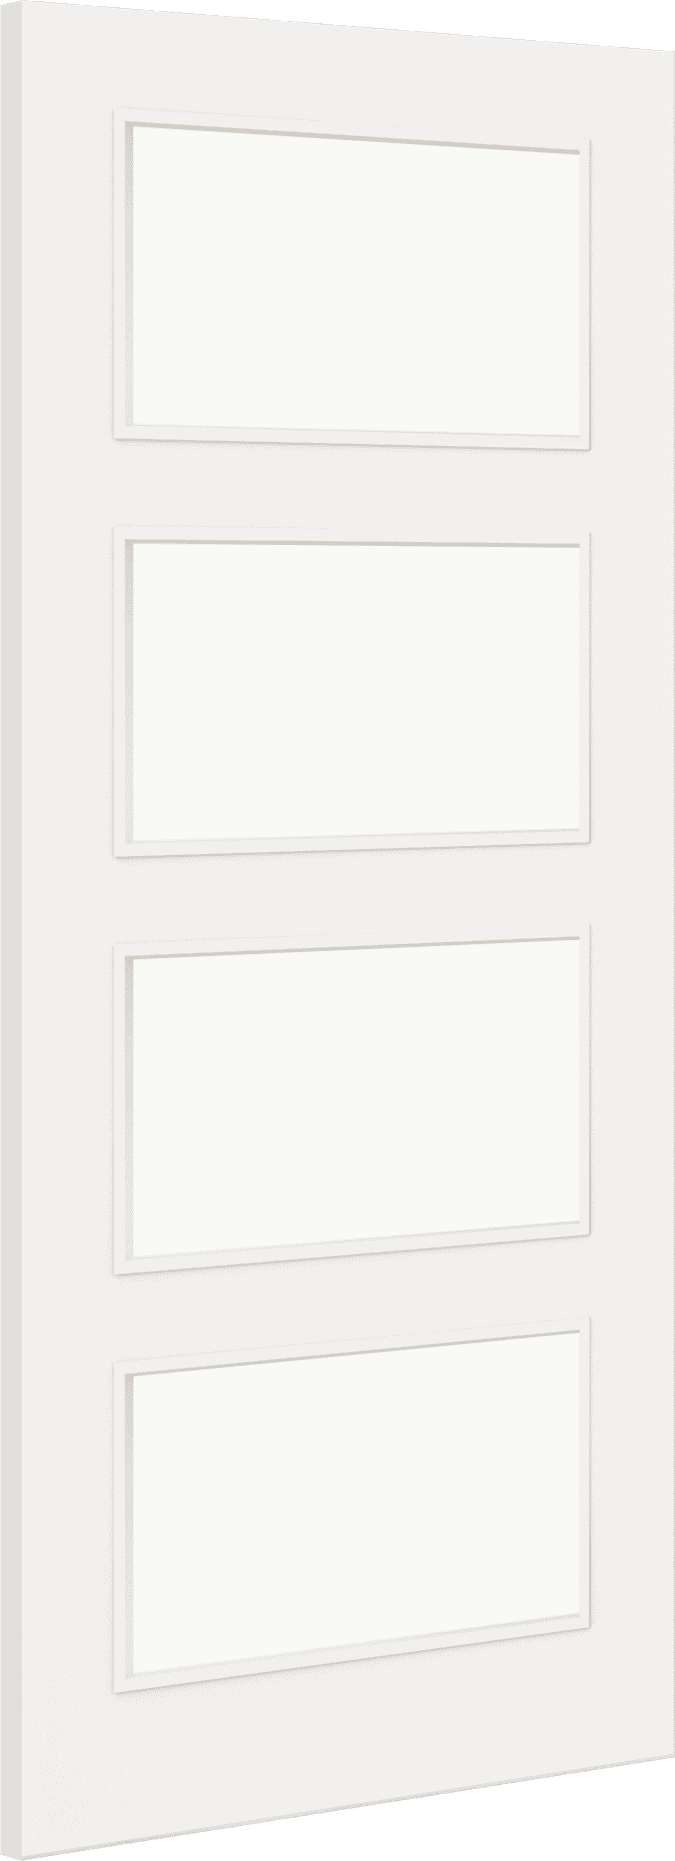 2040mm x 726mm x 44mm Architectural Paint Grade White 04 Clear Glazed Fire Door Blank